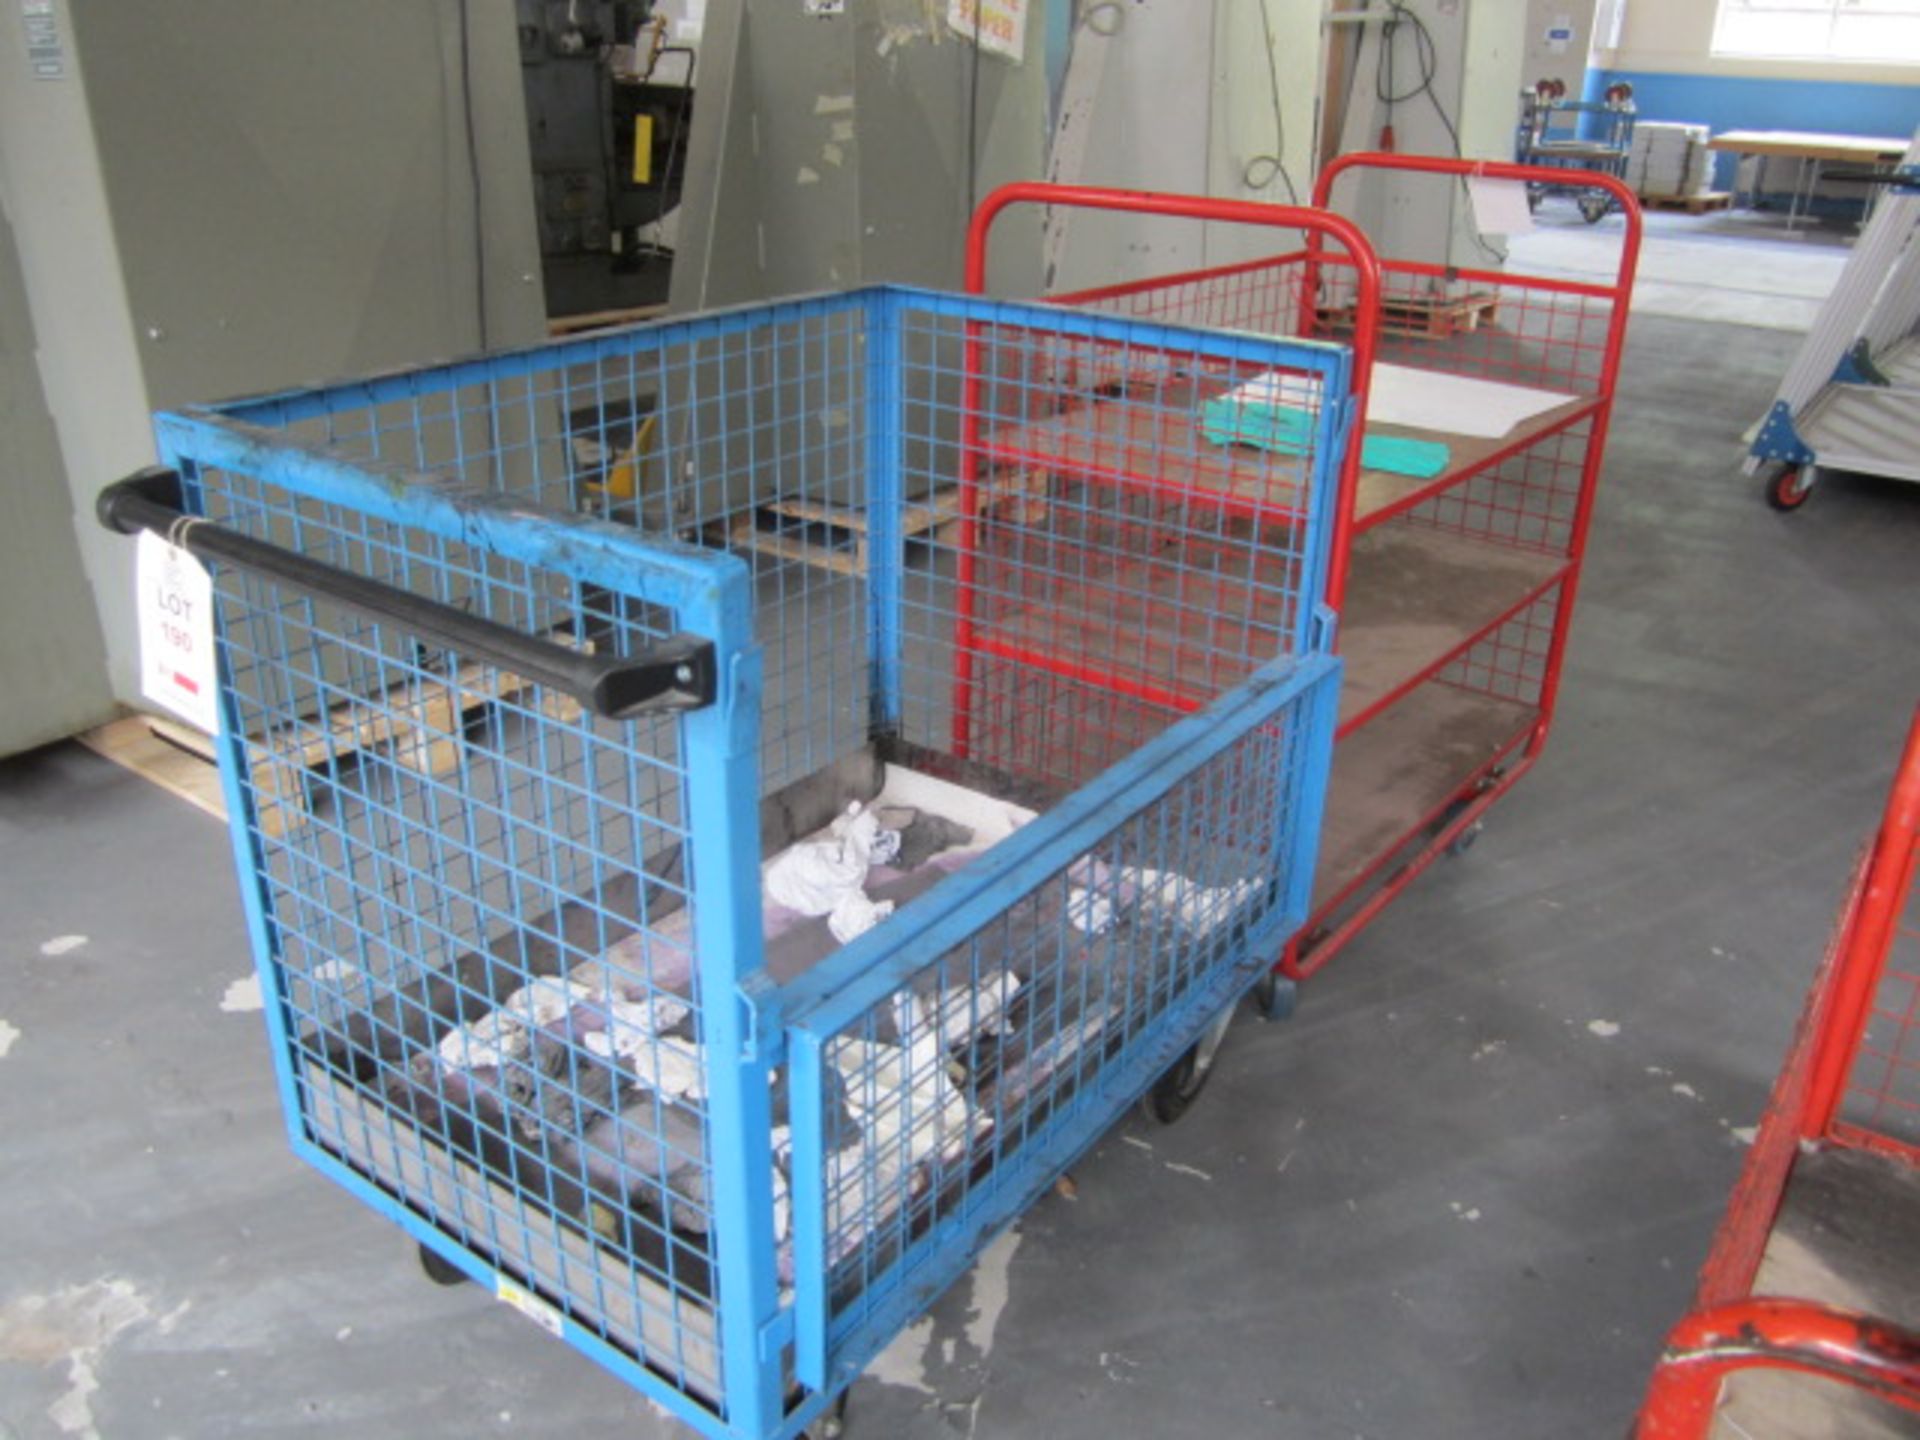 1 x metal mesh sides trolley, 1 x metal frame/ mesh side with 3 shelves. - Lift out charge to be